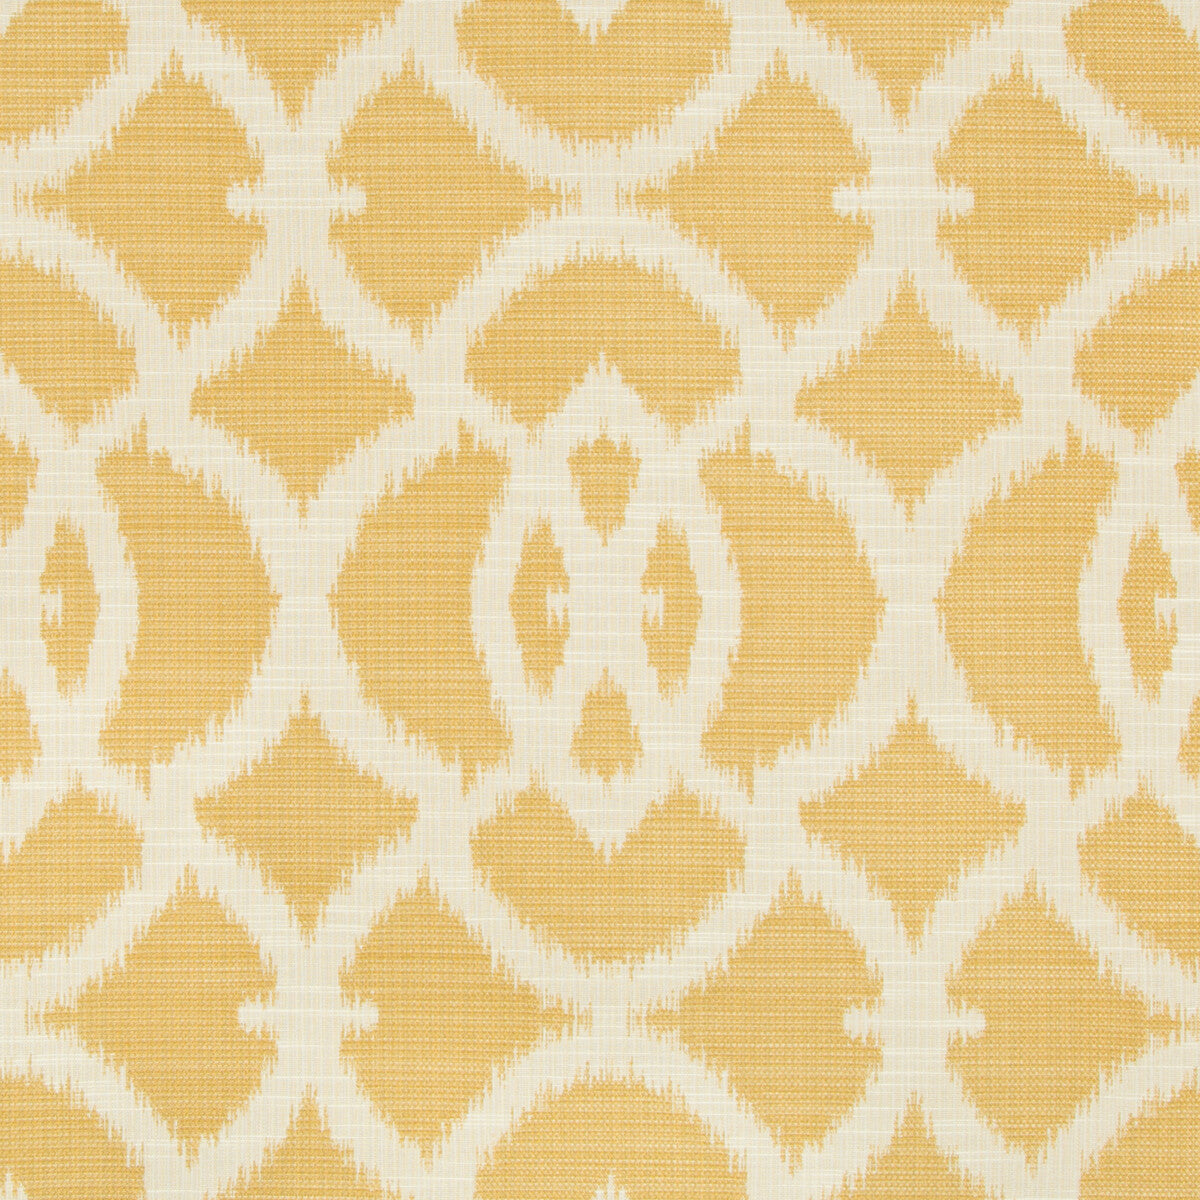 Kravet Contract fabric in 34749-4 color - pattern 34749.4.0 - by Kravet Contract in the Gis collection